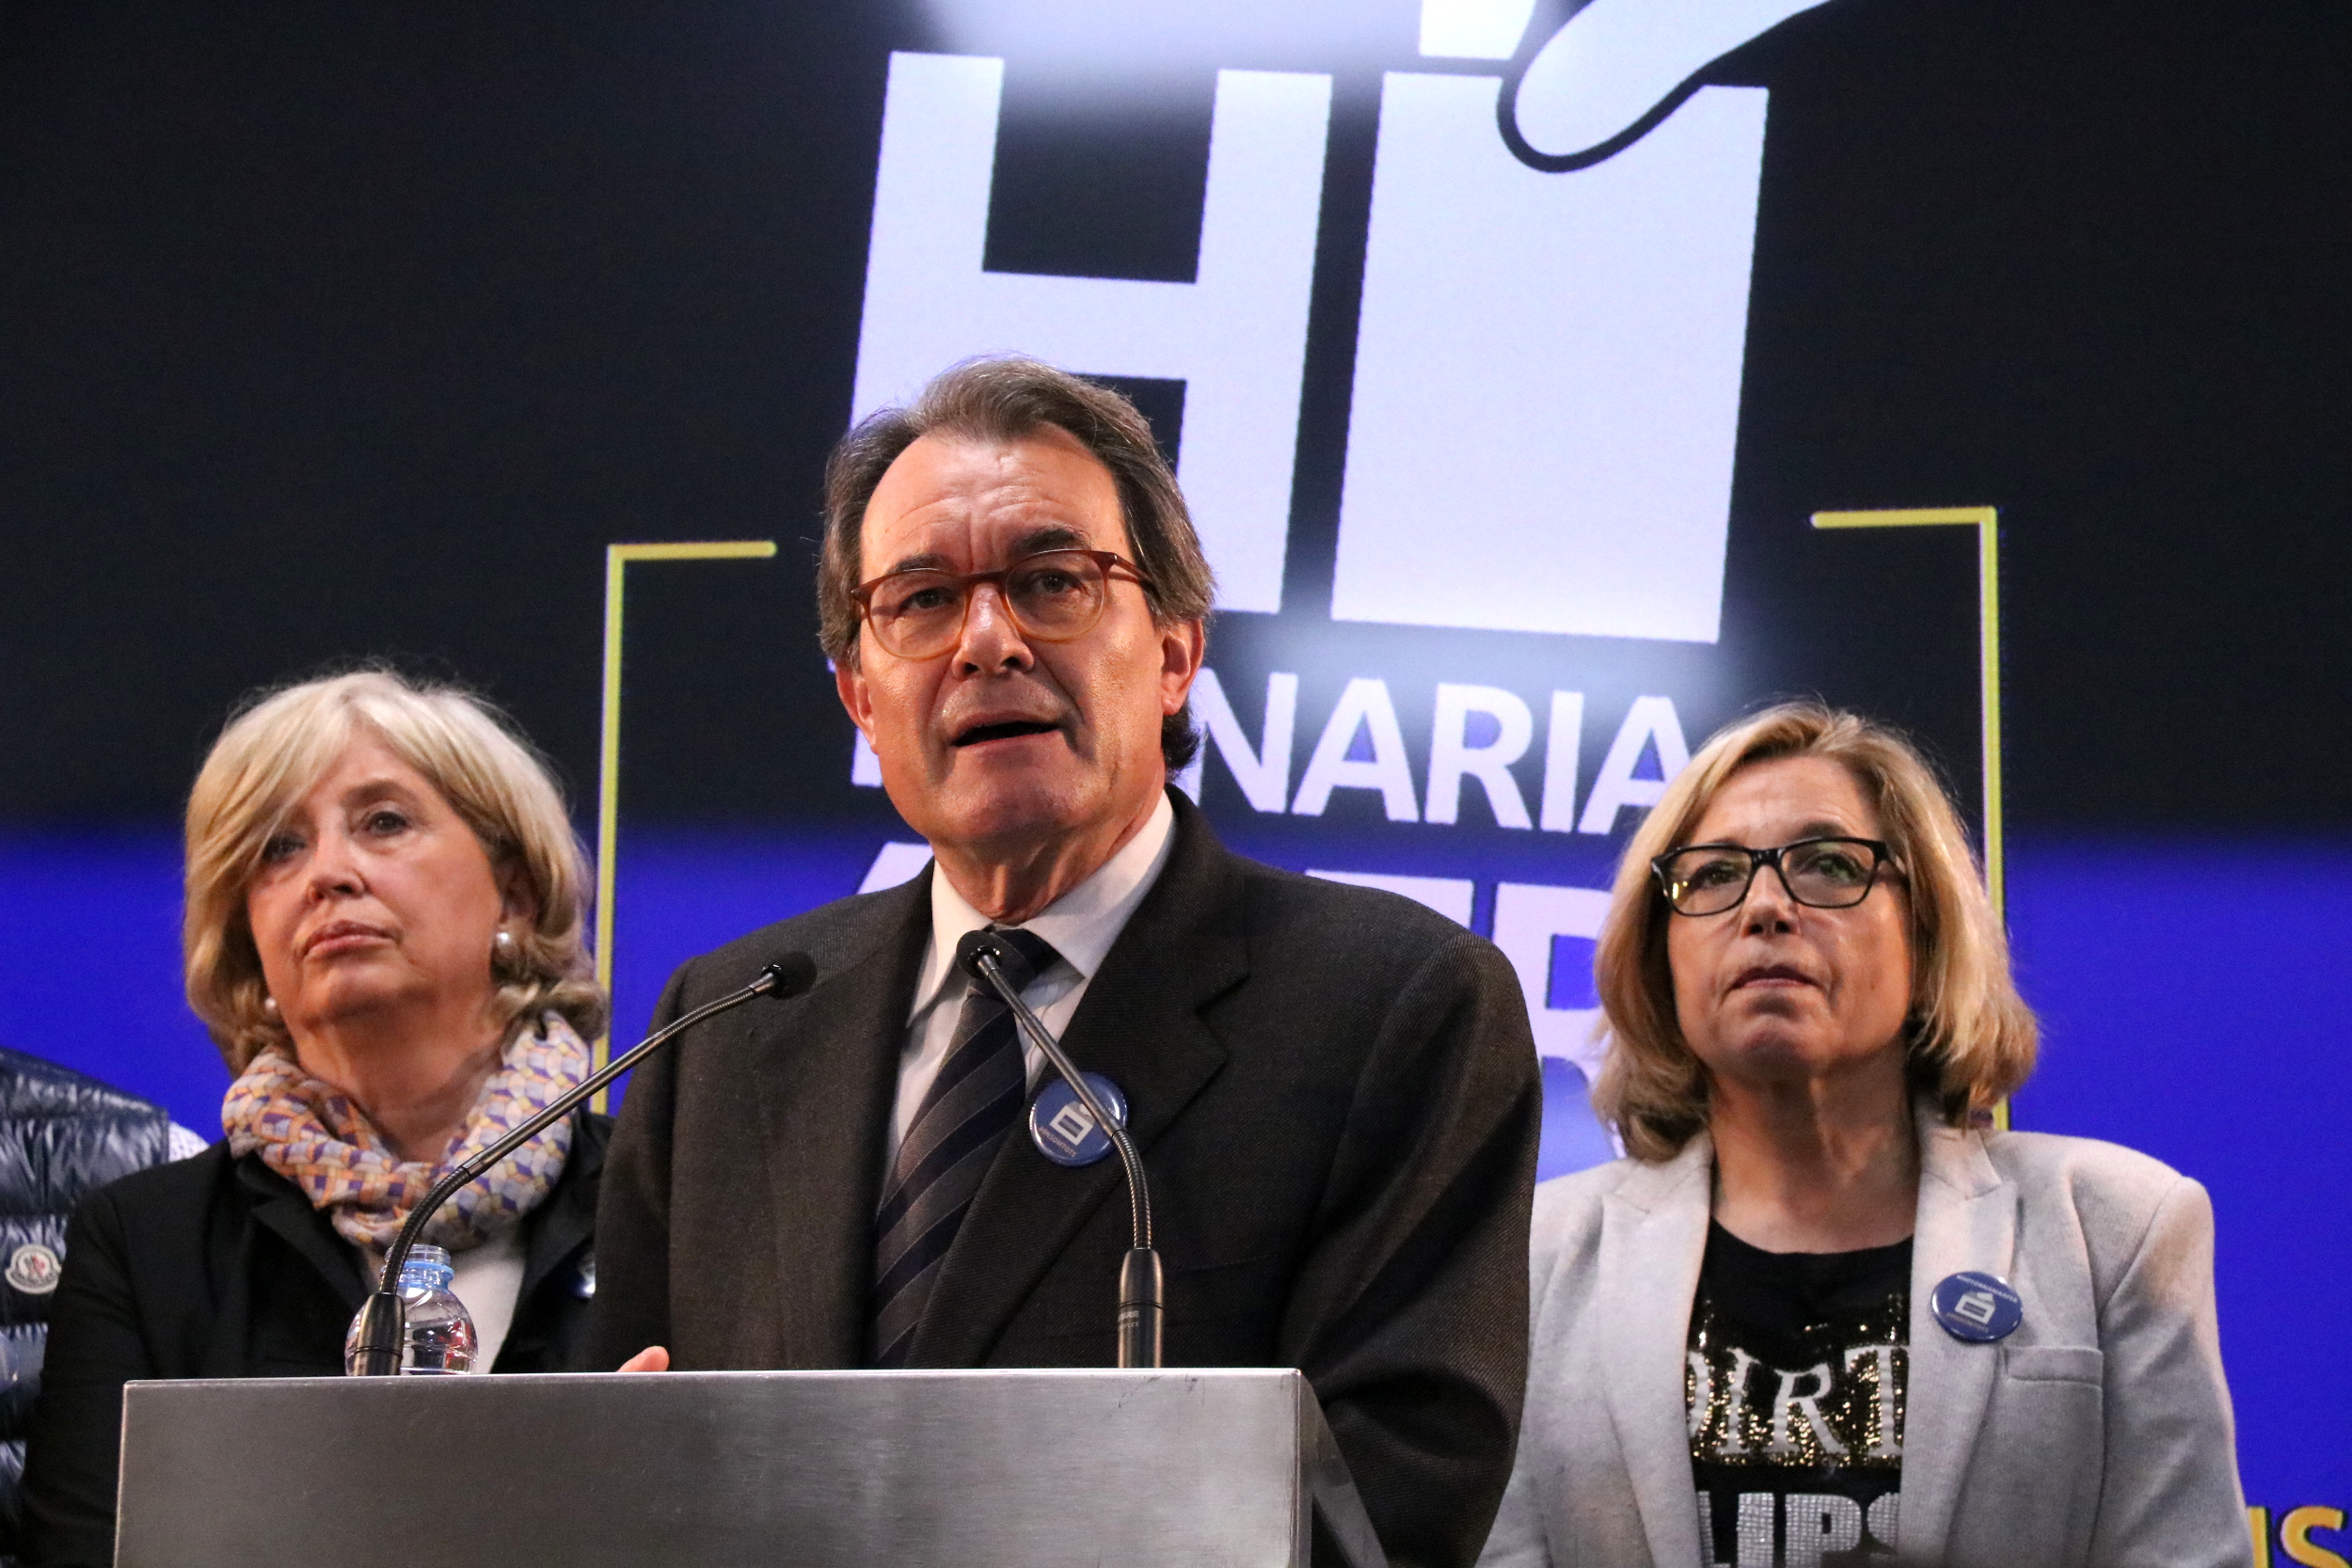 Former Catalan President, Artur Mas, together with former Vice President, Joana Ortega and former Catalan Minsiter for Education, Irene Rigau, addressing the press after the sentence over 9-N symbolic vote on independence (by ACN)